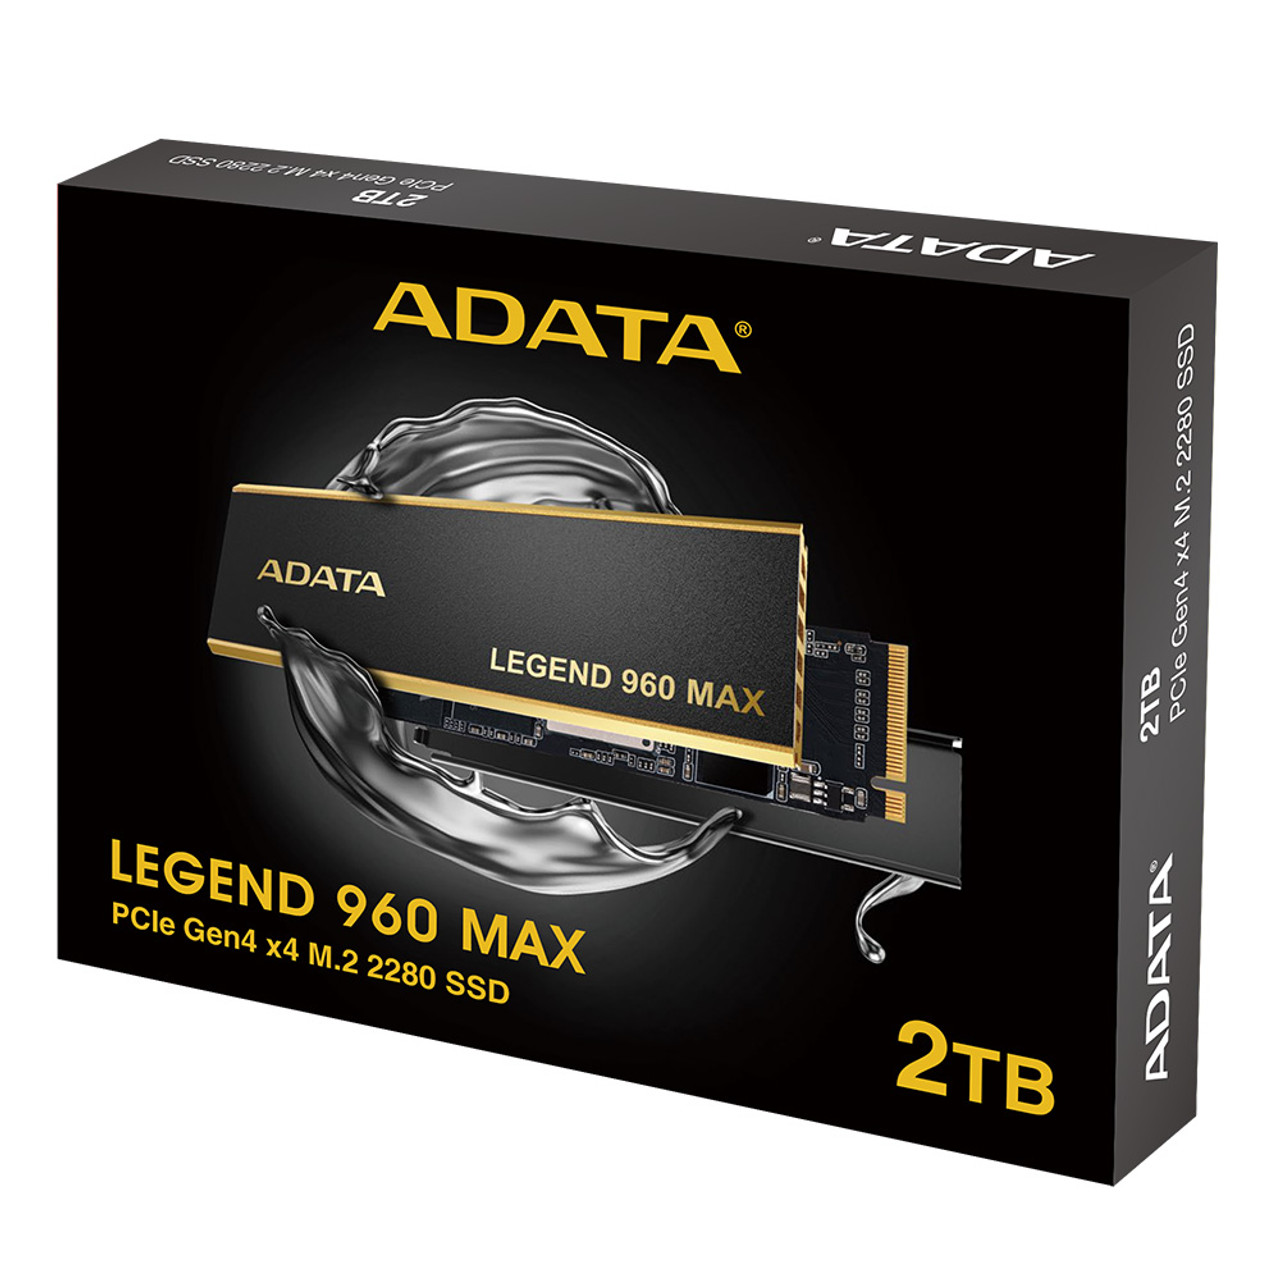 ADATA LEGEND 960 MAX 2TB M.2 2280 PCIe Gen4x4 Internal Solid State Drive, 1560TBW - SMI SM2264 3D NAND, Up to 7400 MBps - Black PS5 SSD 2 Terabyte